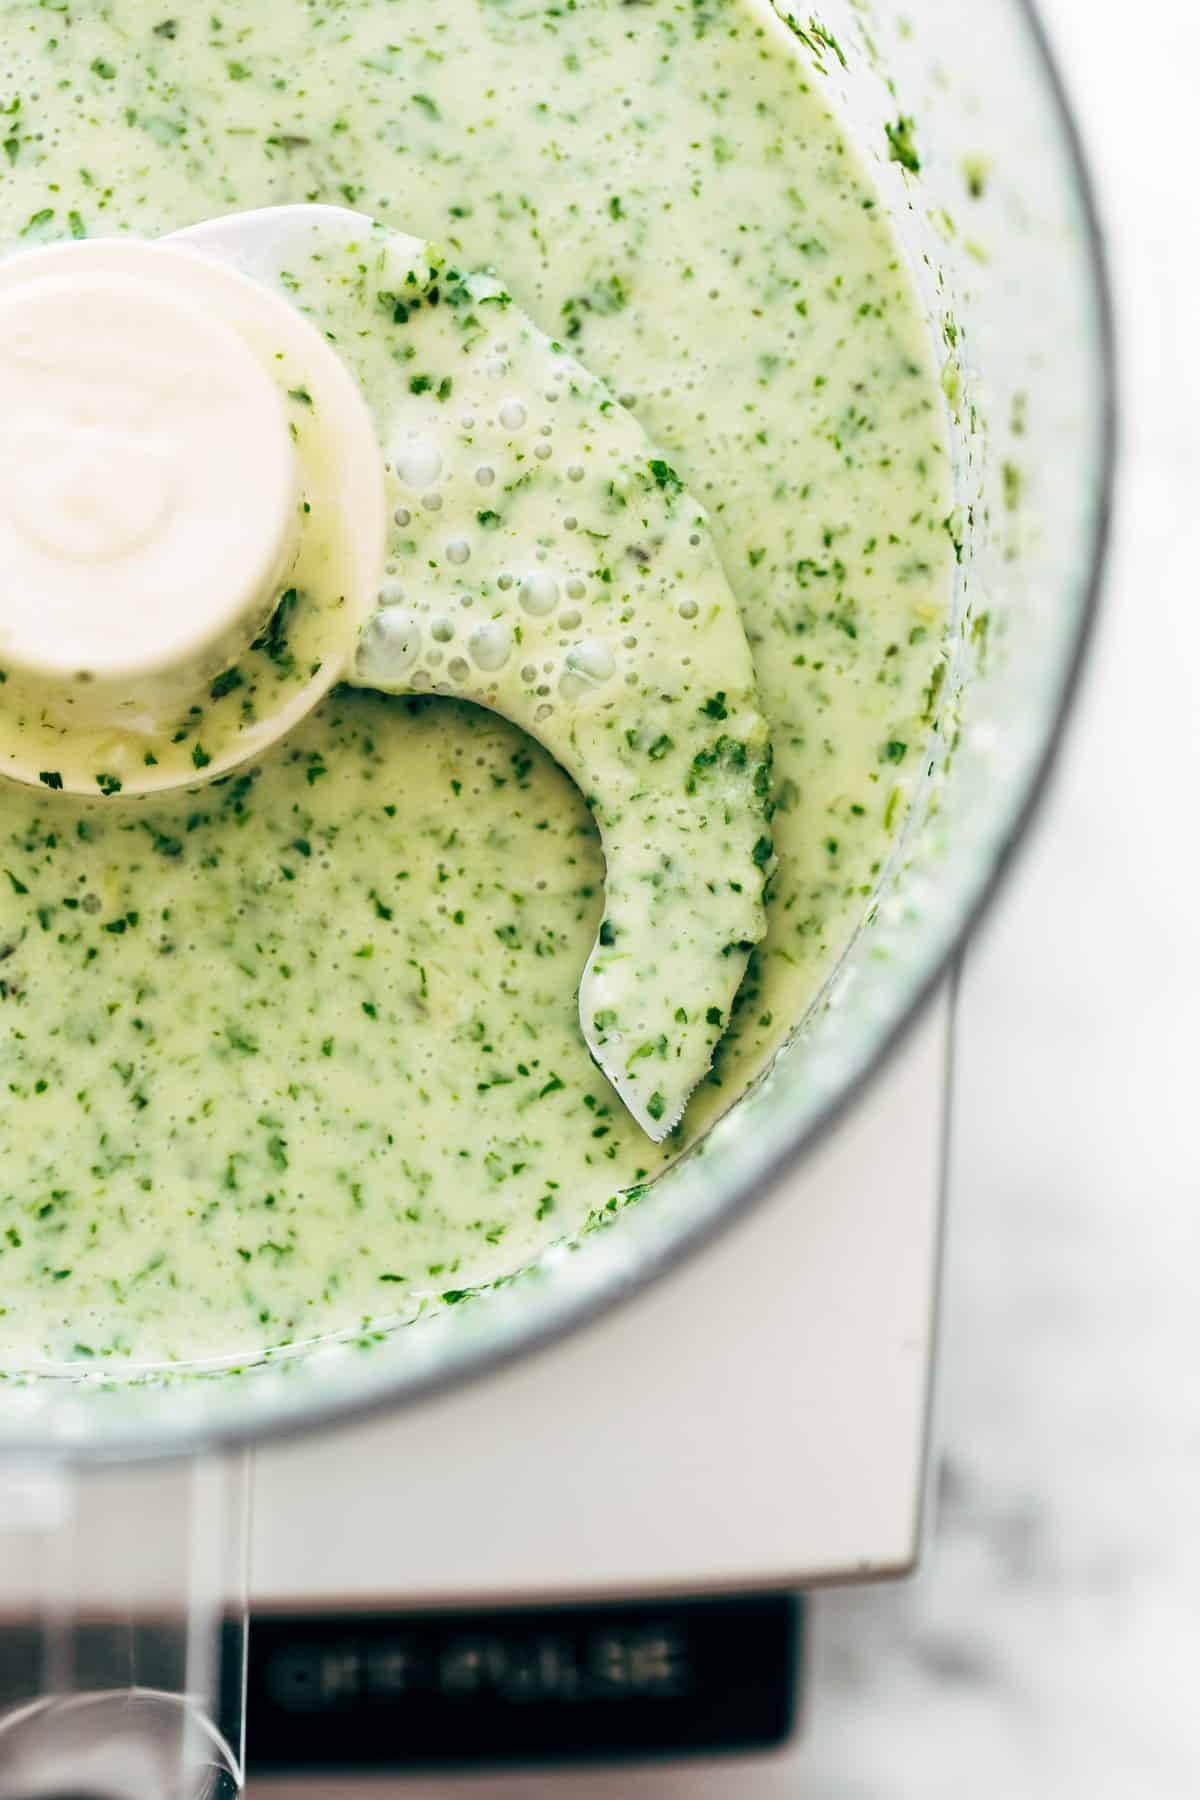 Coconut lime sauce in a food processor.